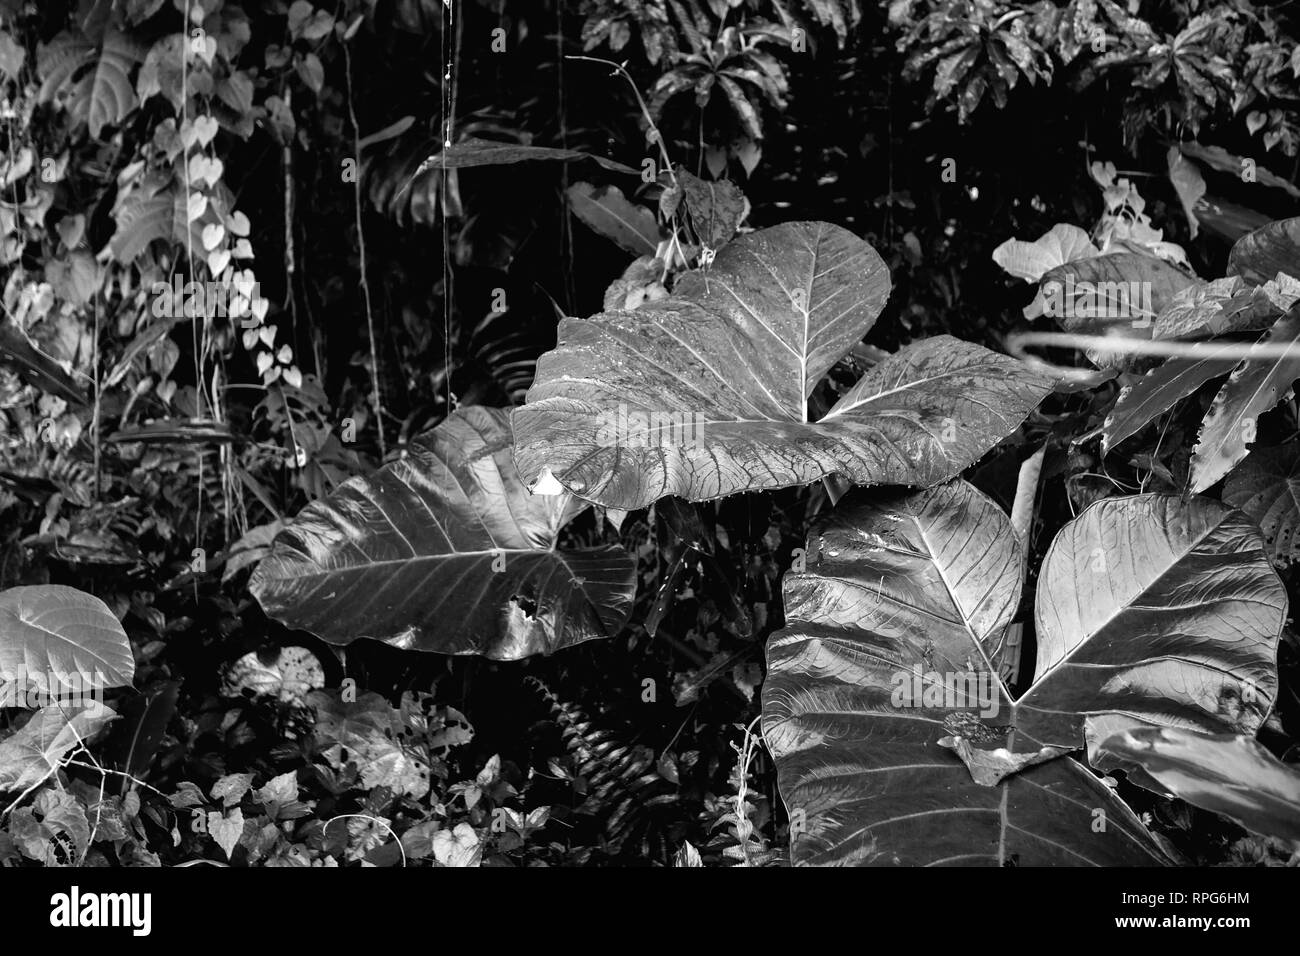 Wet jungle leaves after rain in black and white image Stock Photo